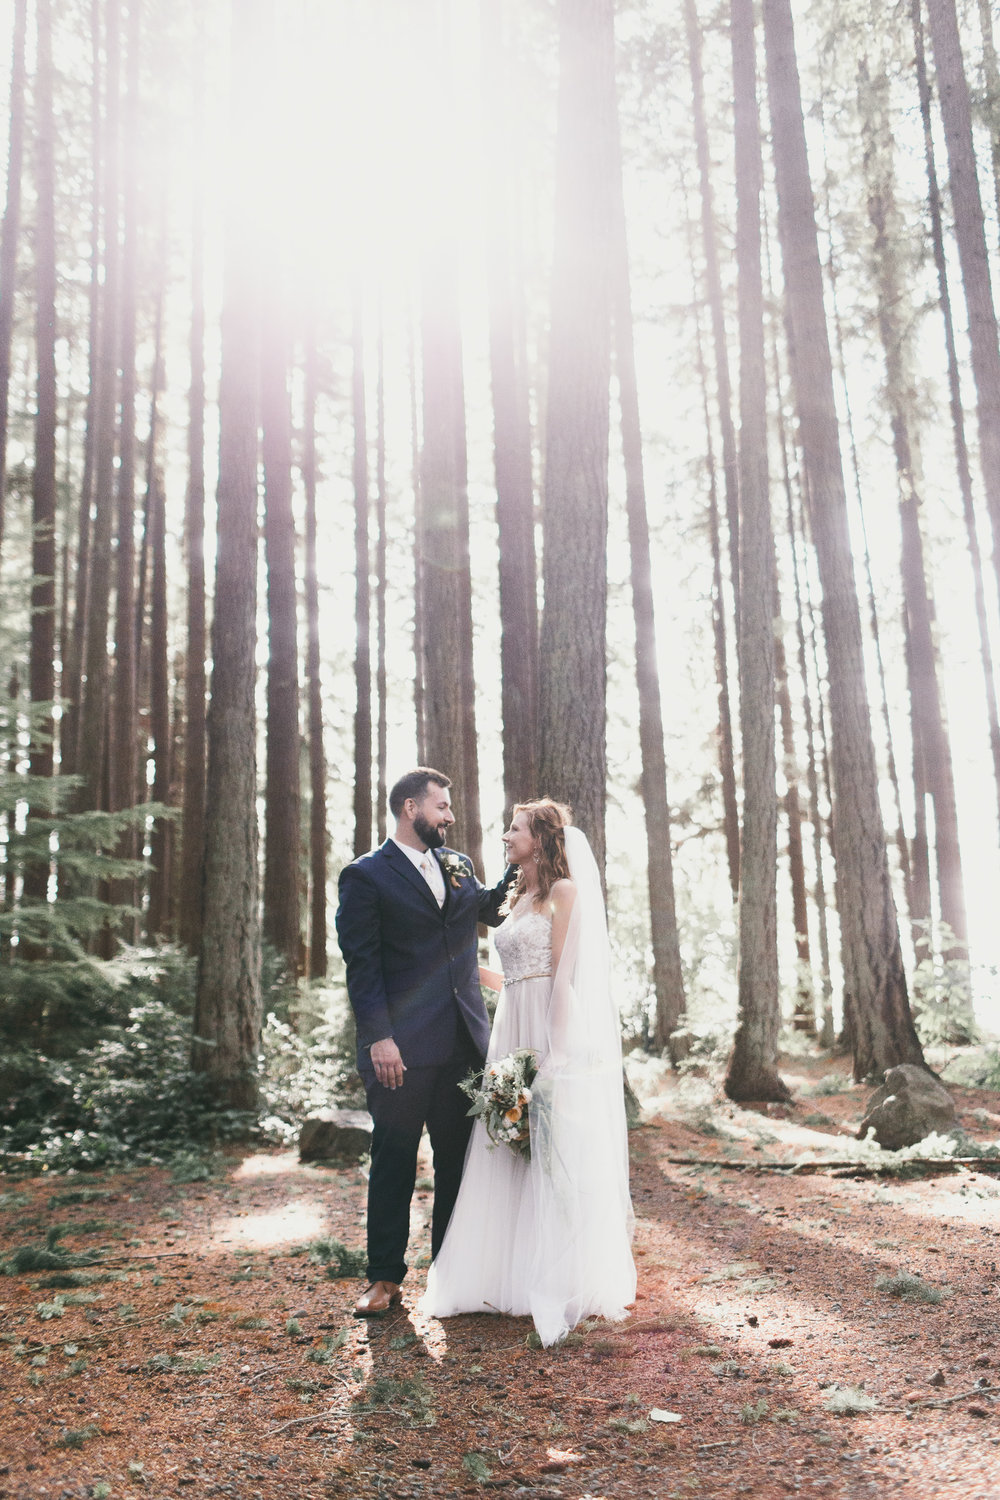 sun shining through trees at kitsap memorial state park with bride and groom